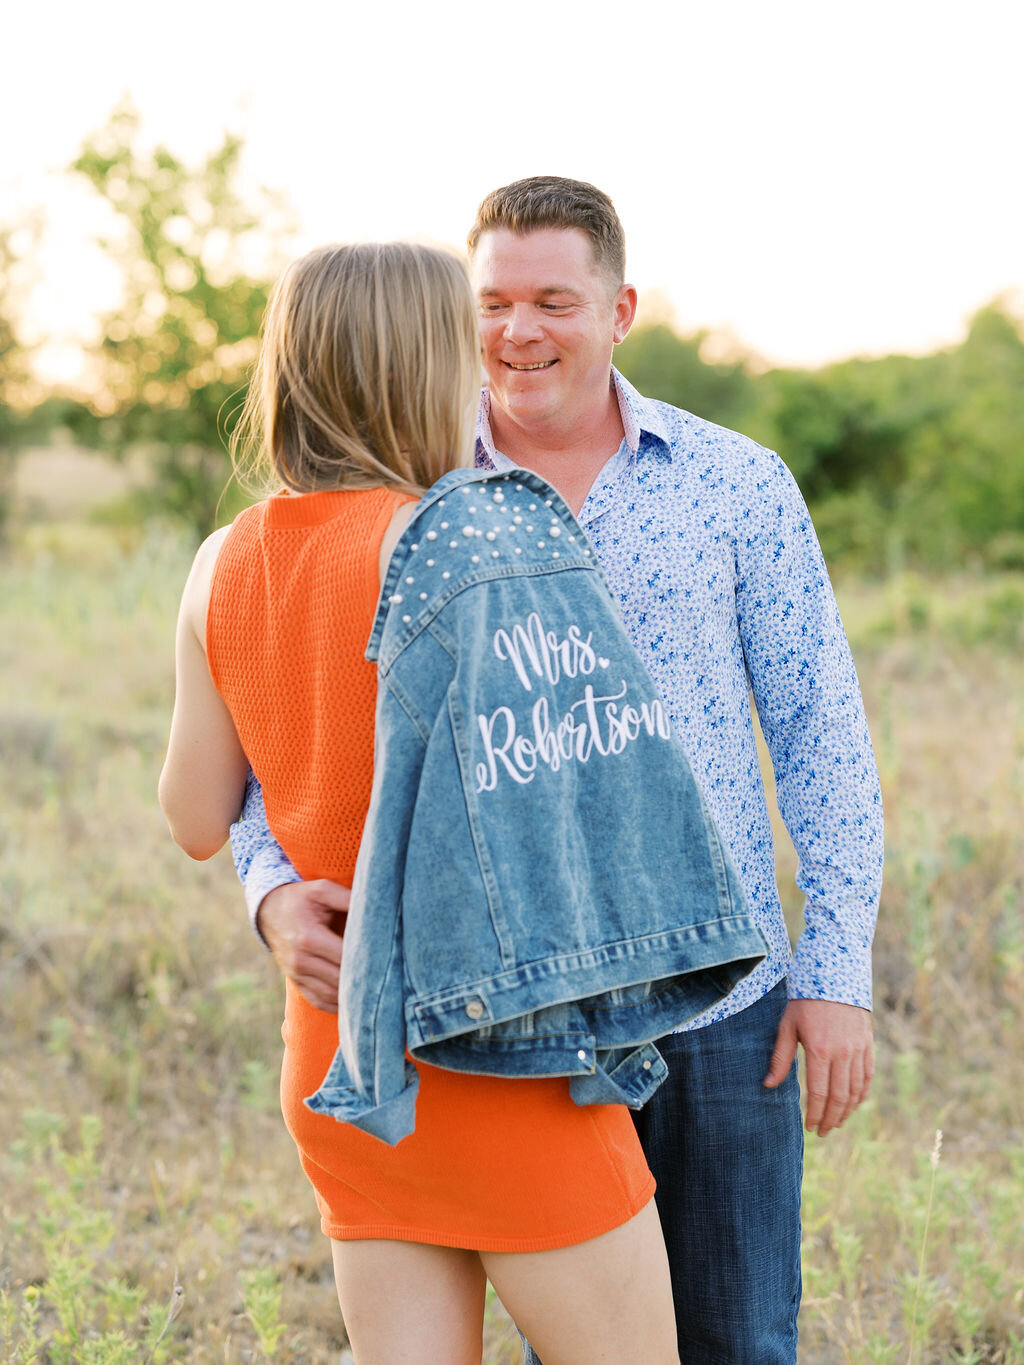 Engagement portraits on family ranch10